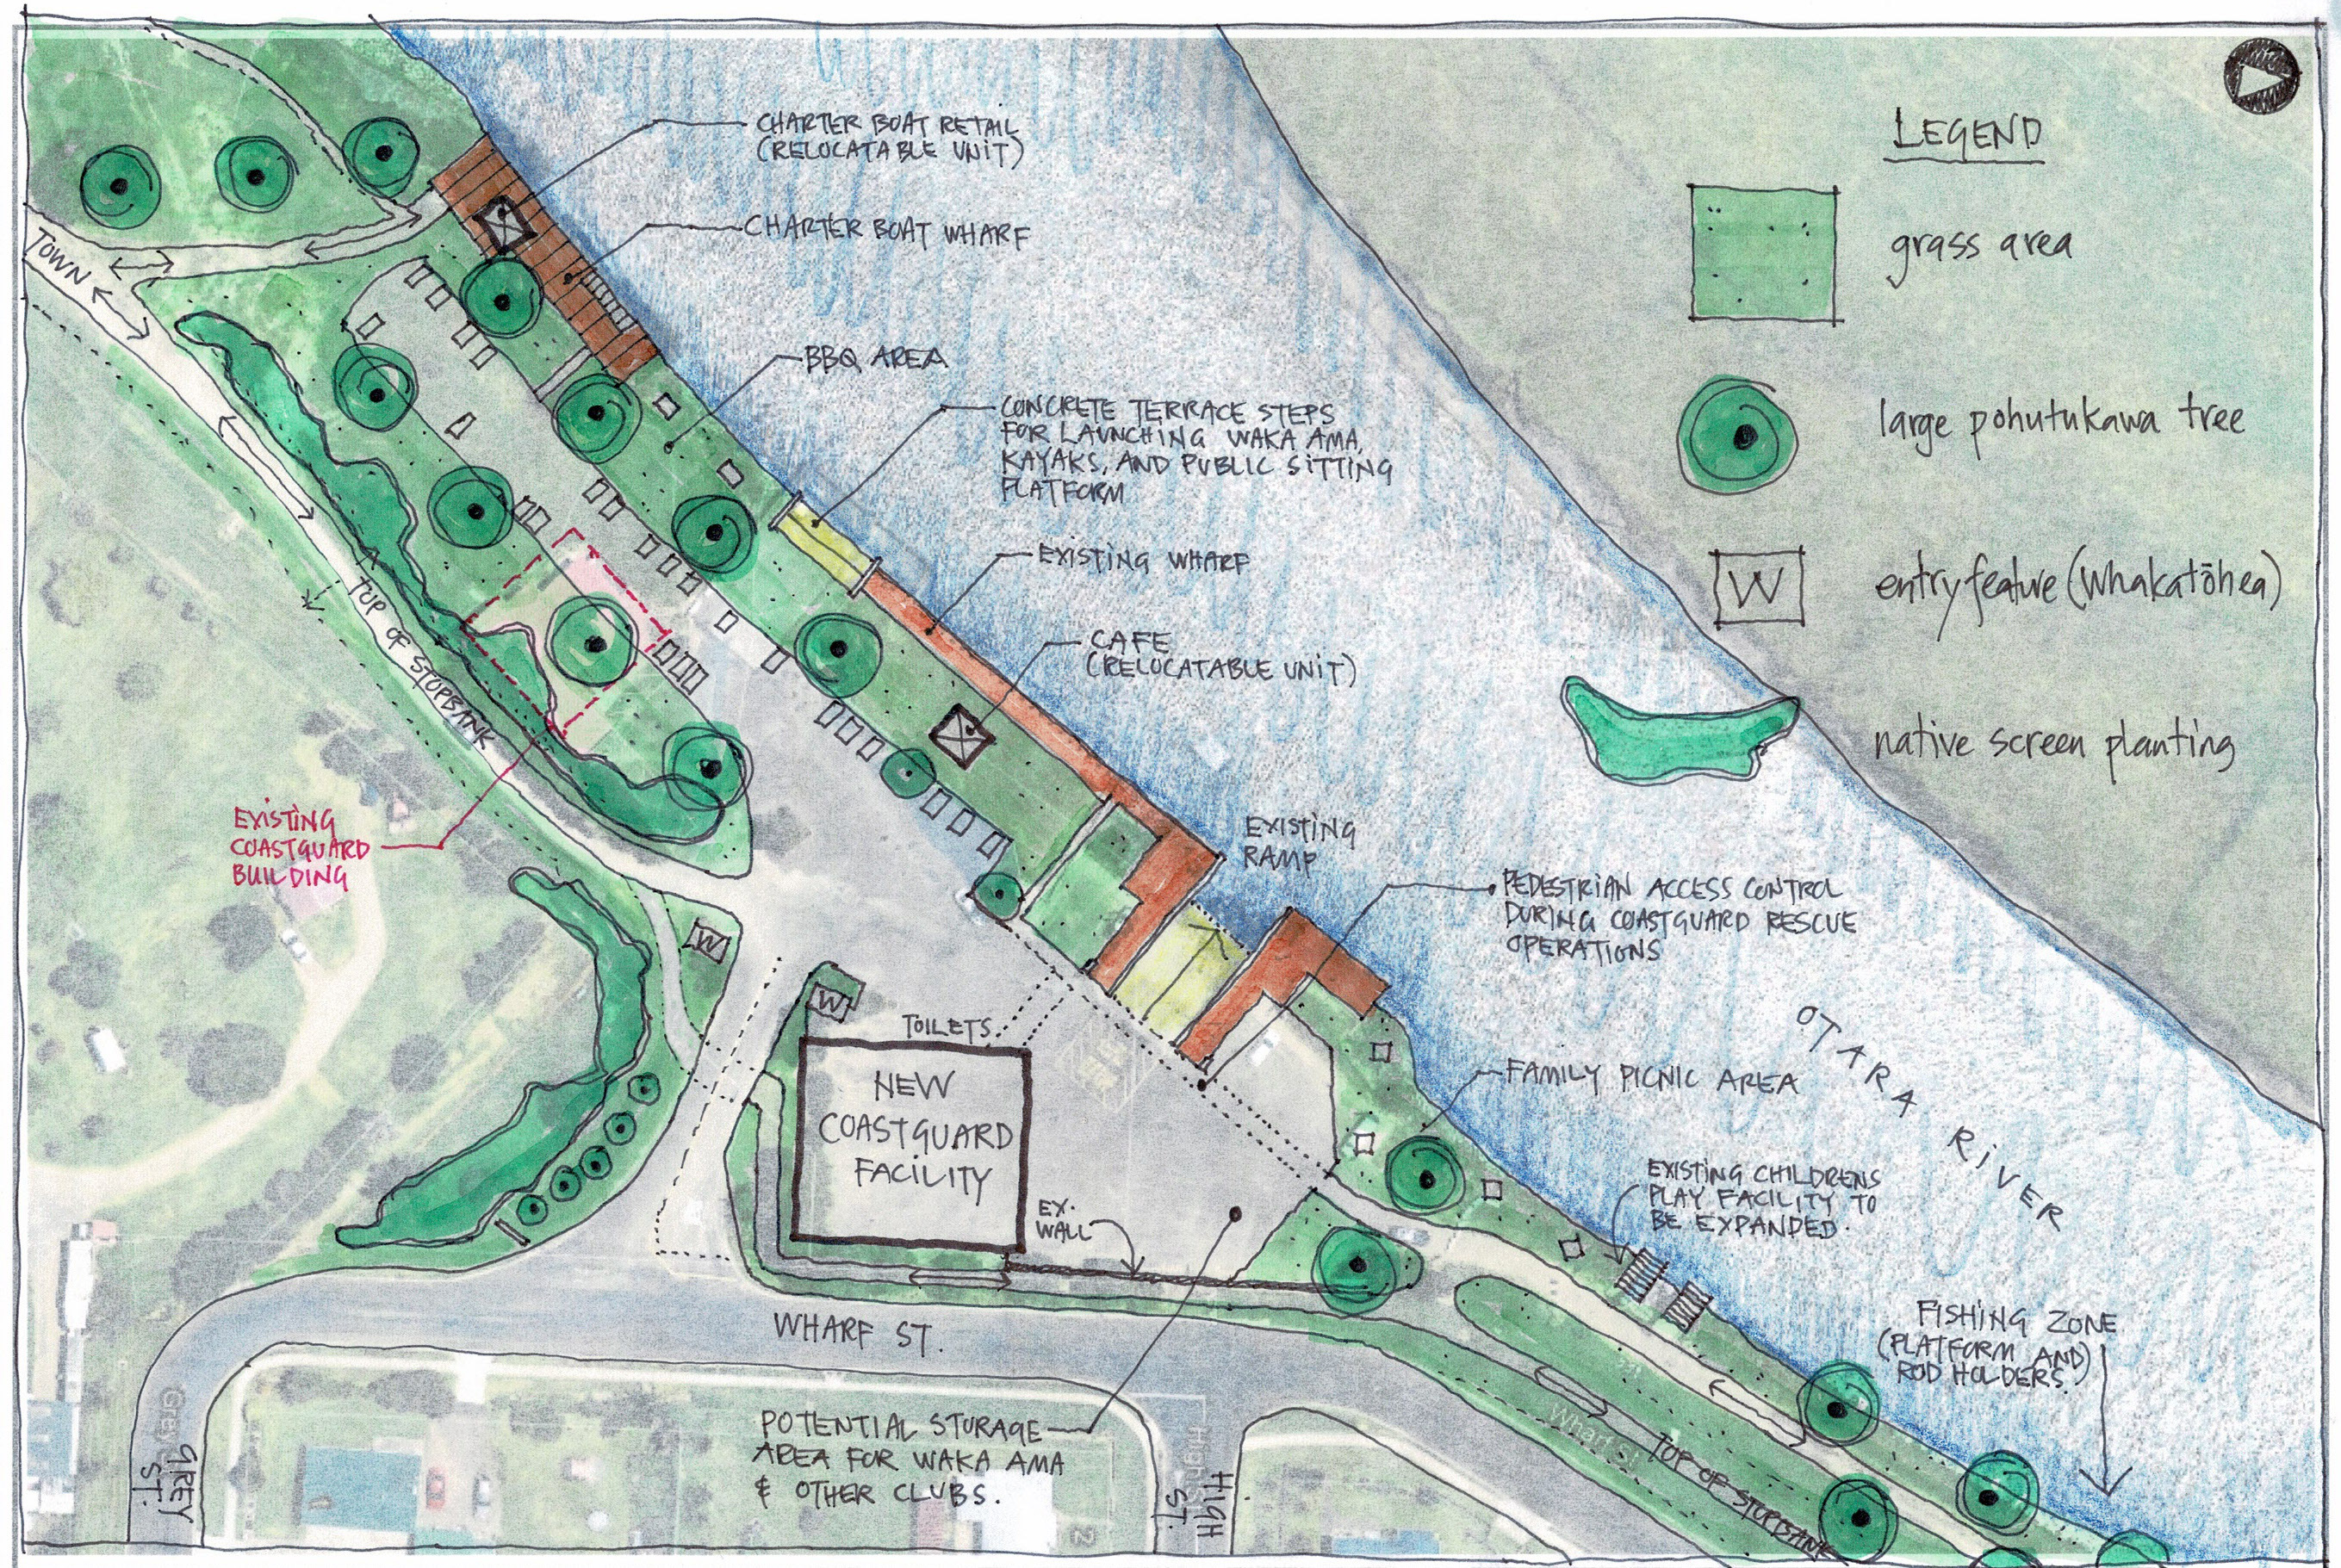 Graphic of Option 1 plans for development of at the existing Opotiki wharf